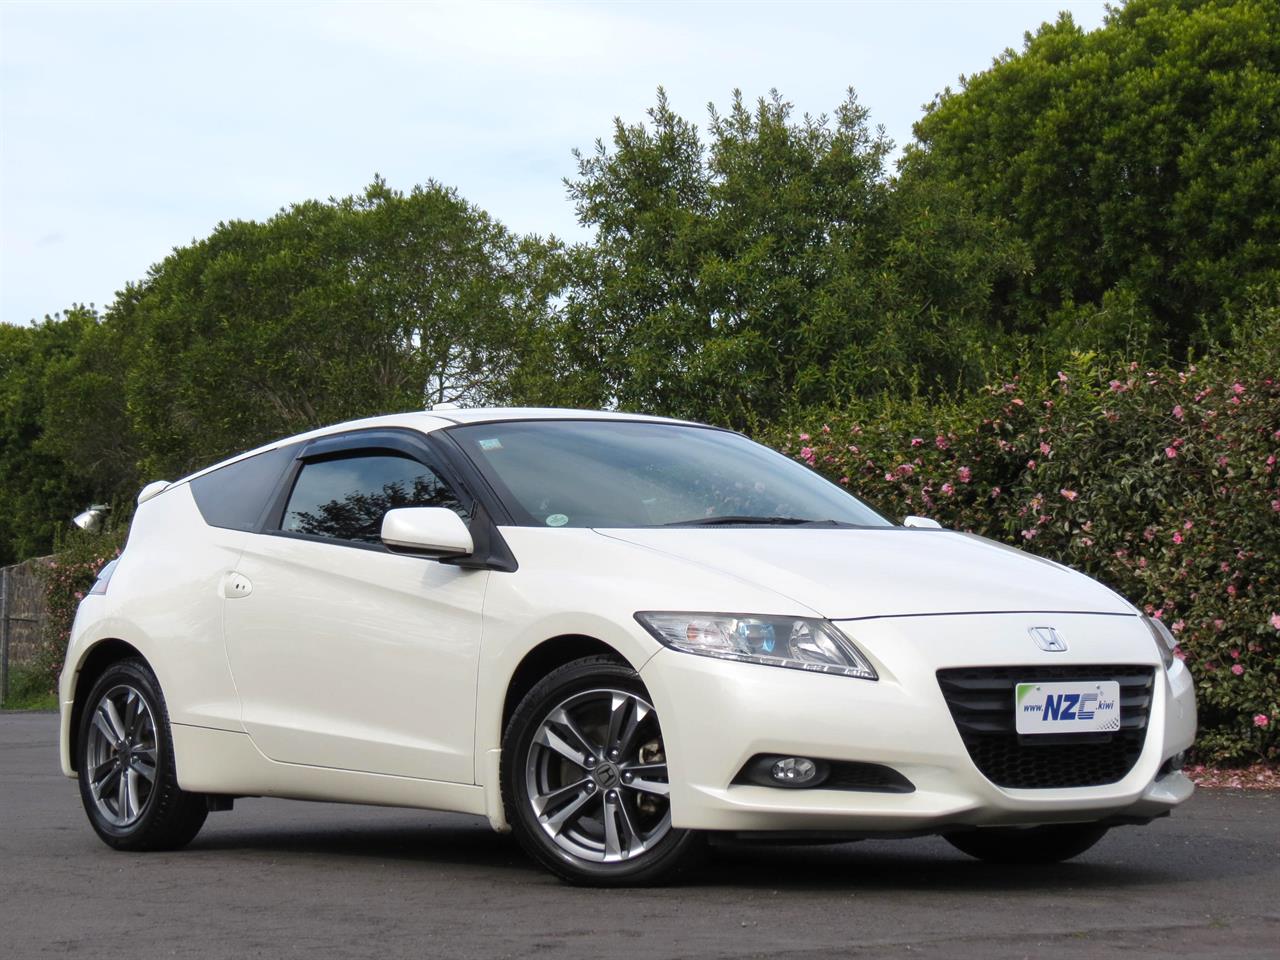 NZC 2012 Honda CR-Z just arrived to Auckland